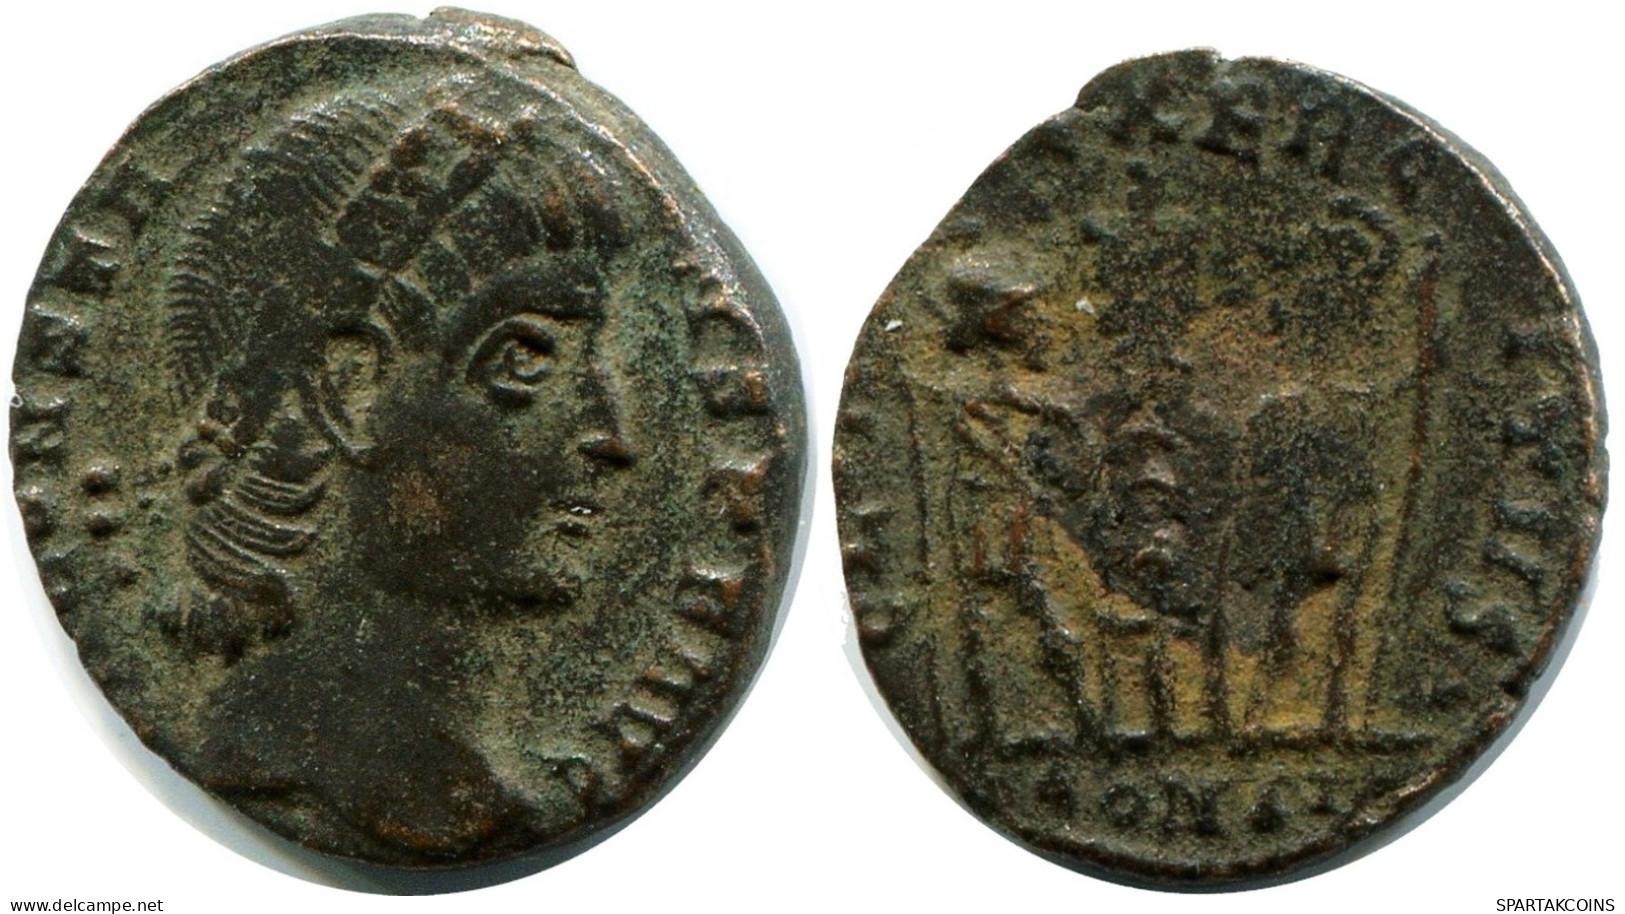 CONSTANS MINTED IN CONSTANTINOPLE FOUND IN IHNASYAH HOARD EGYPT #ANC11926.14.E.A - El Imperio Christiano (307 / 363)